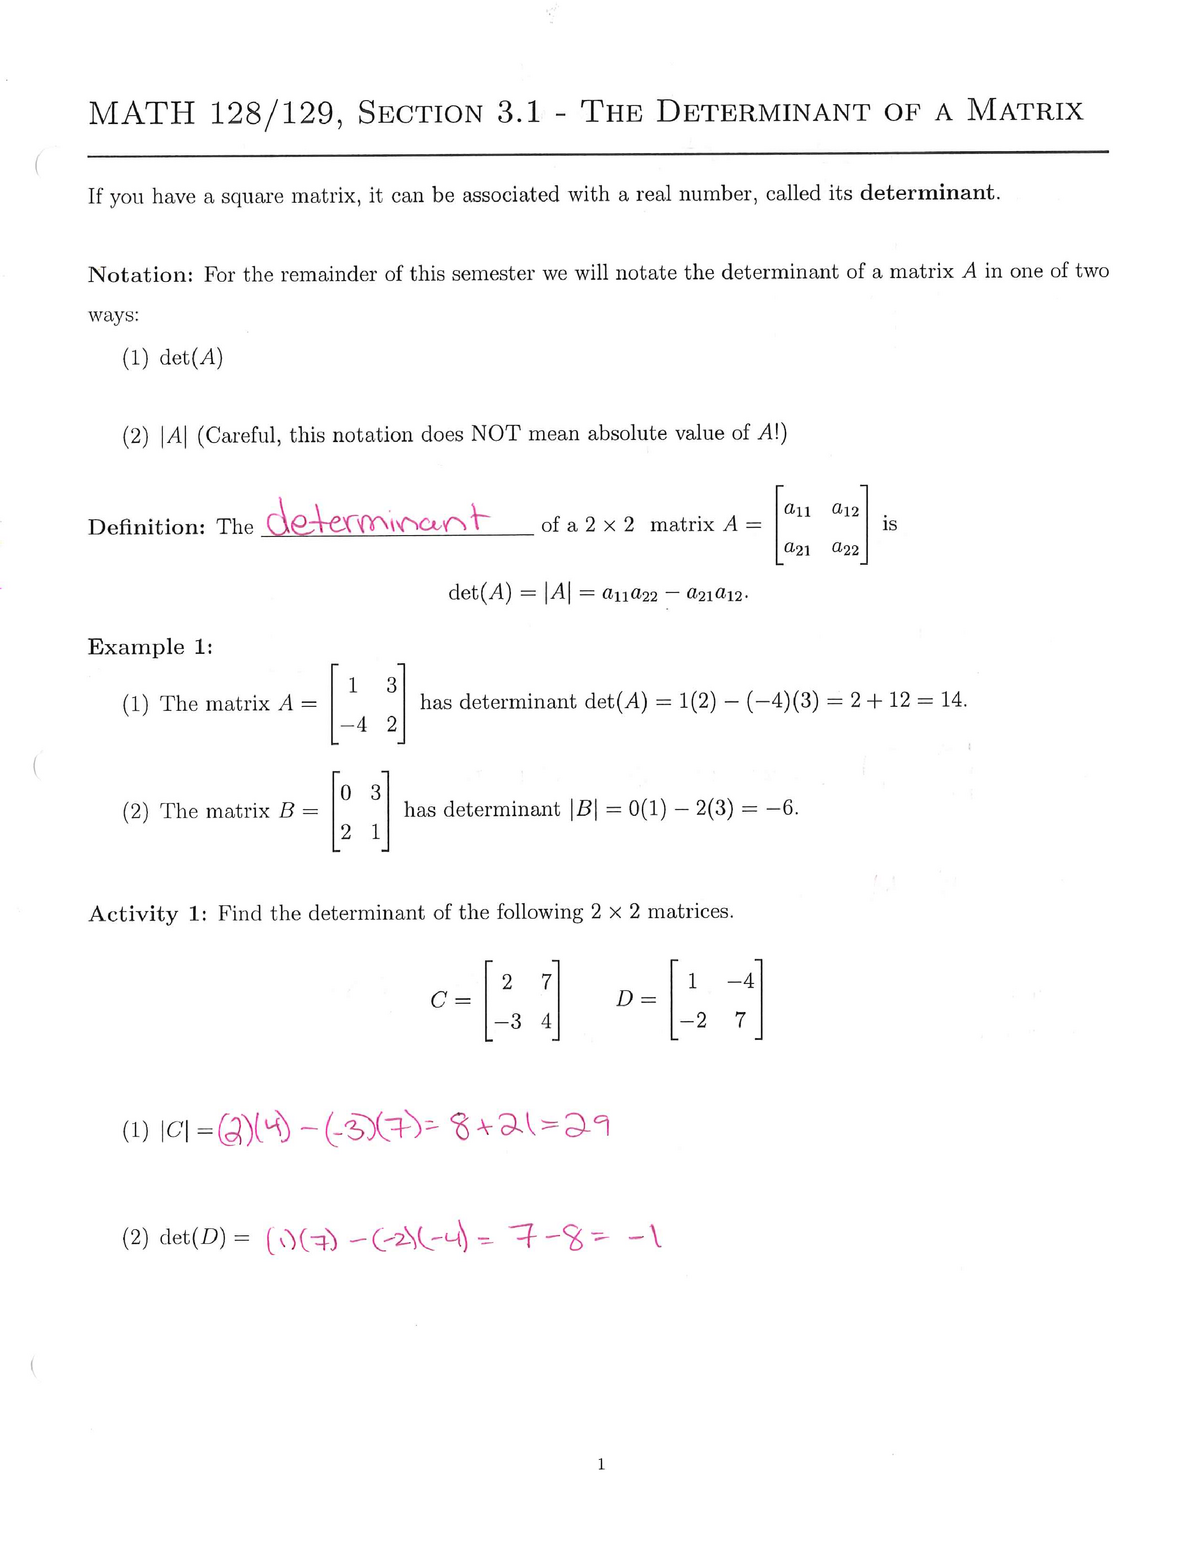 3-1-the-determinant-of-a-matrix-math-128-129-section-3-the